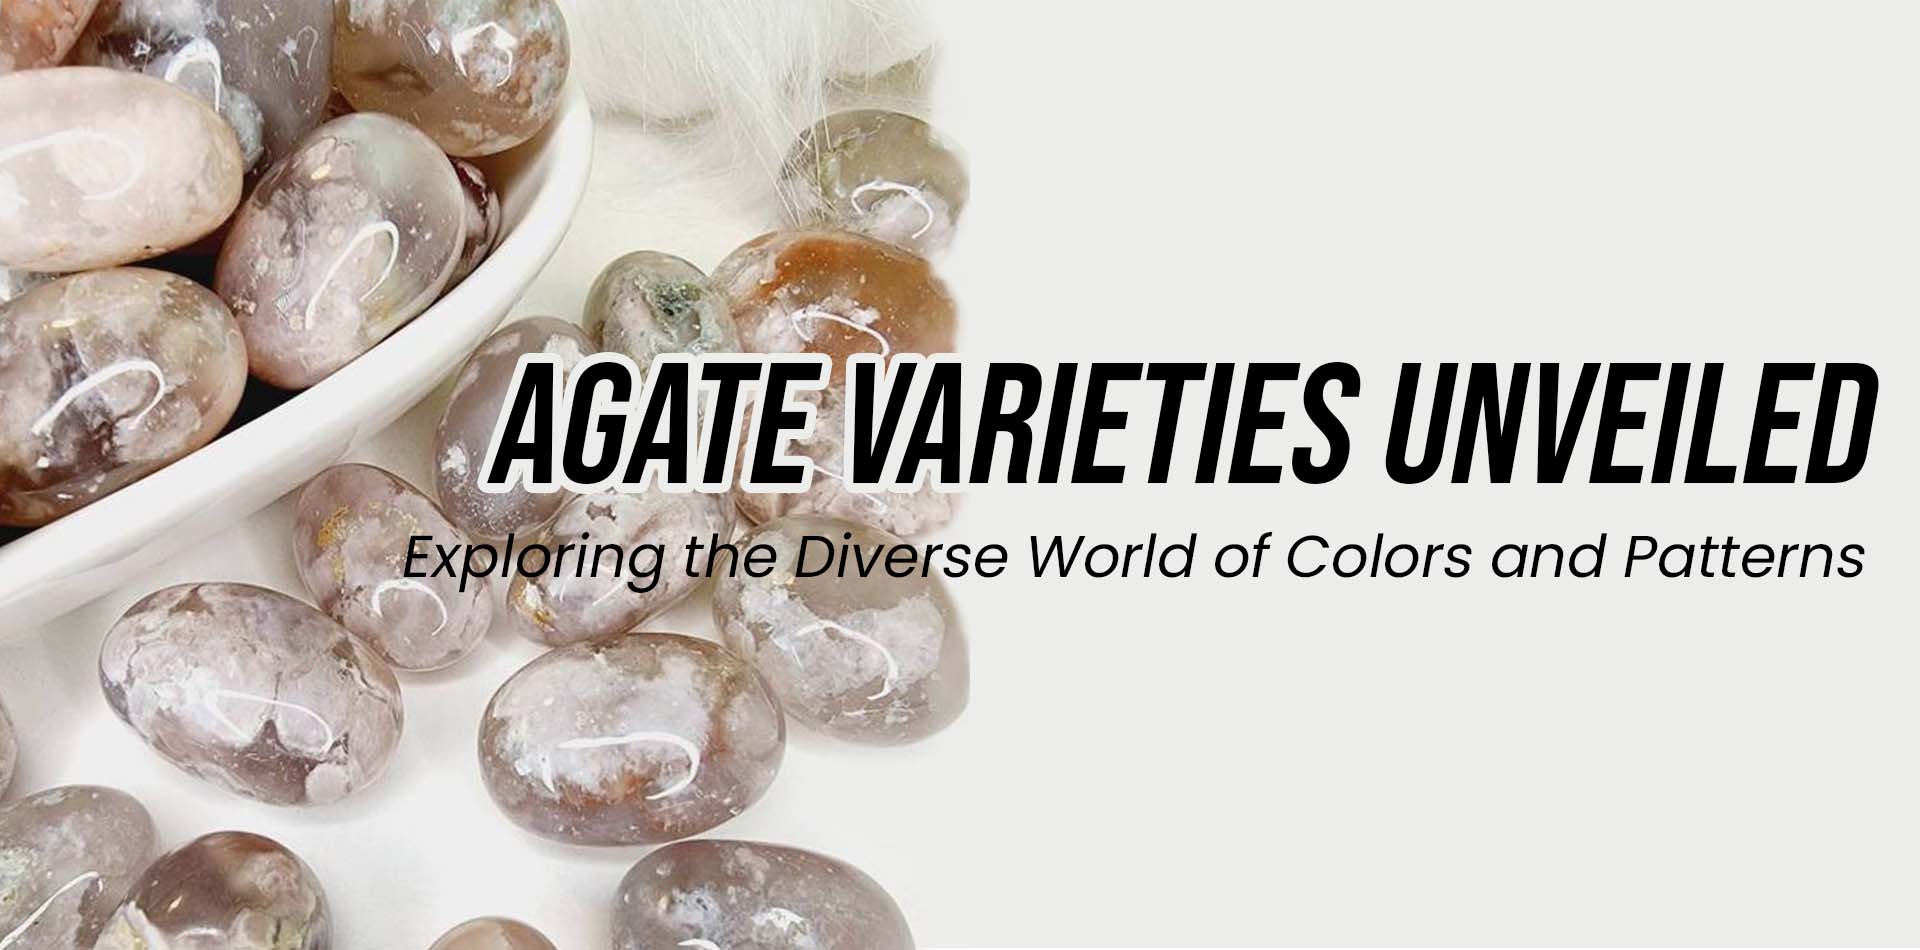 Agate Varieties Unveiled: Exploring the Diverse World of Colors and Patterns